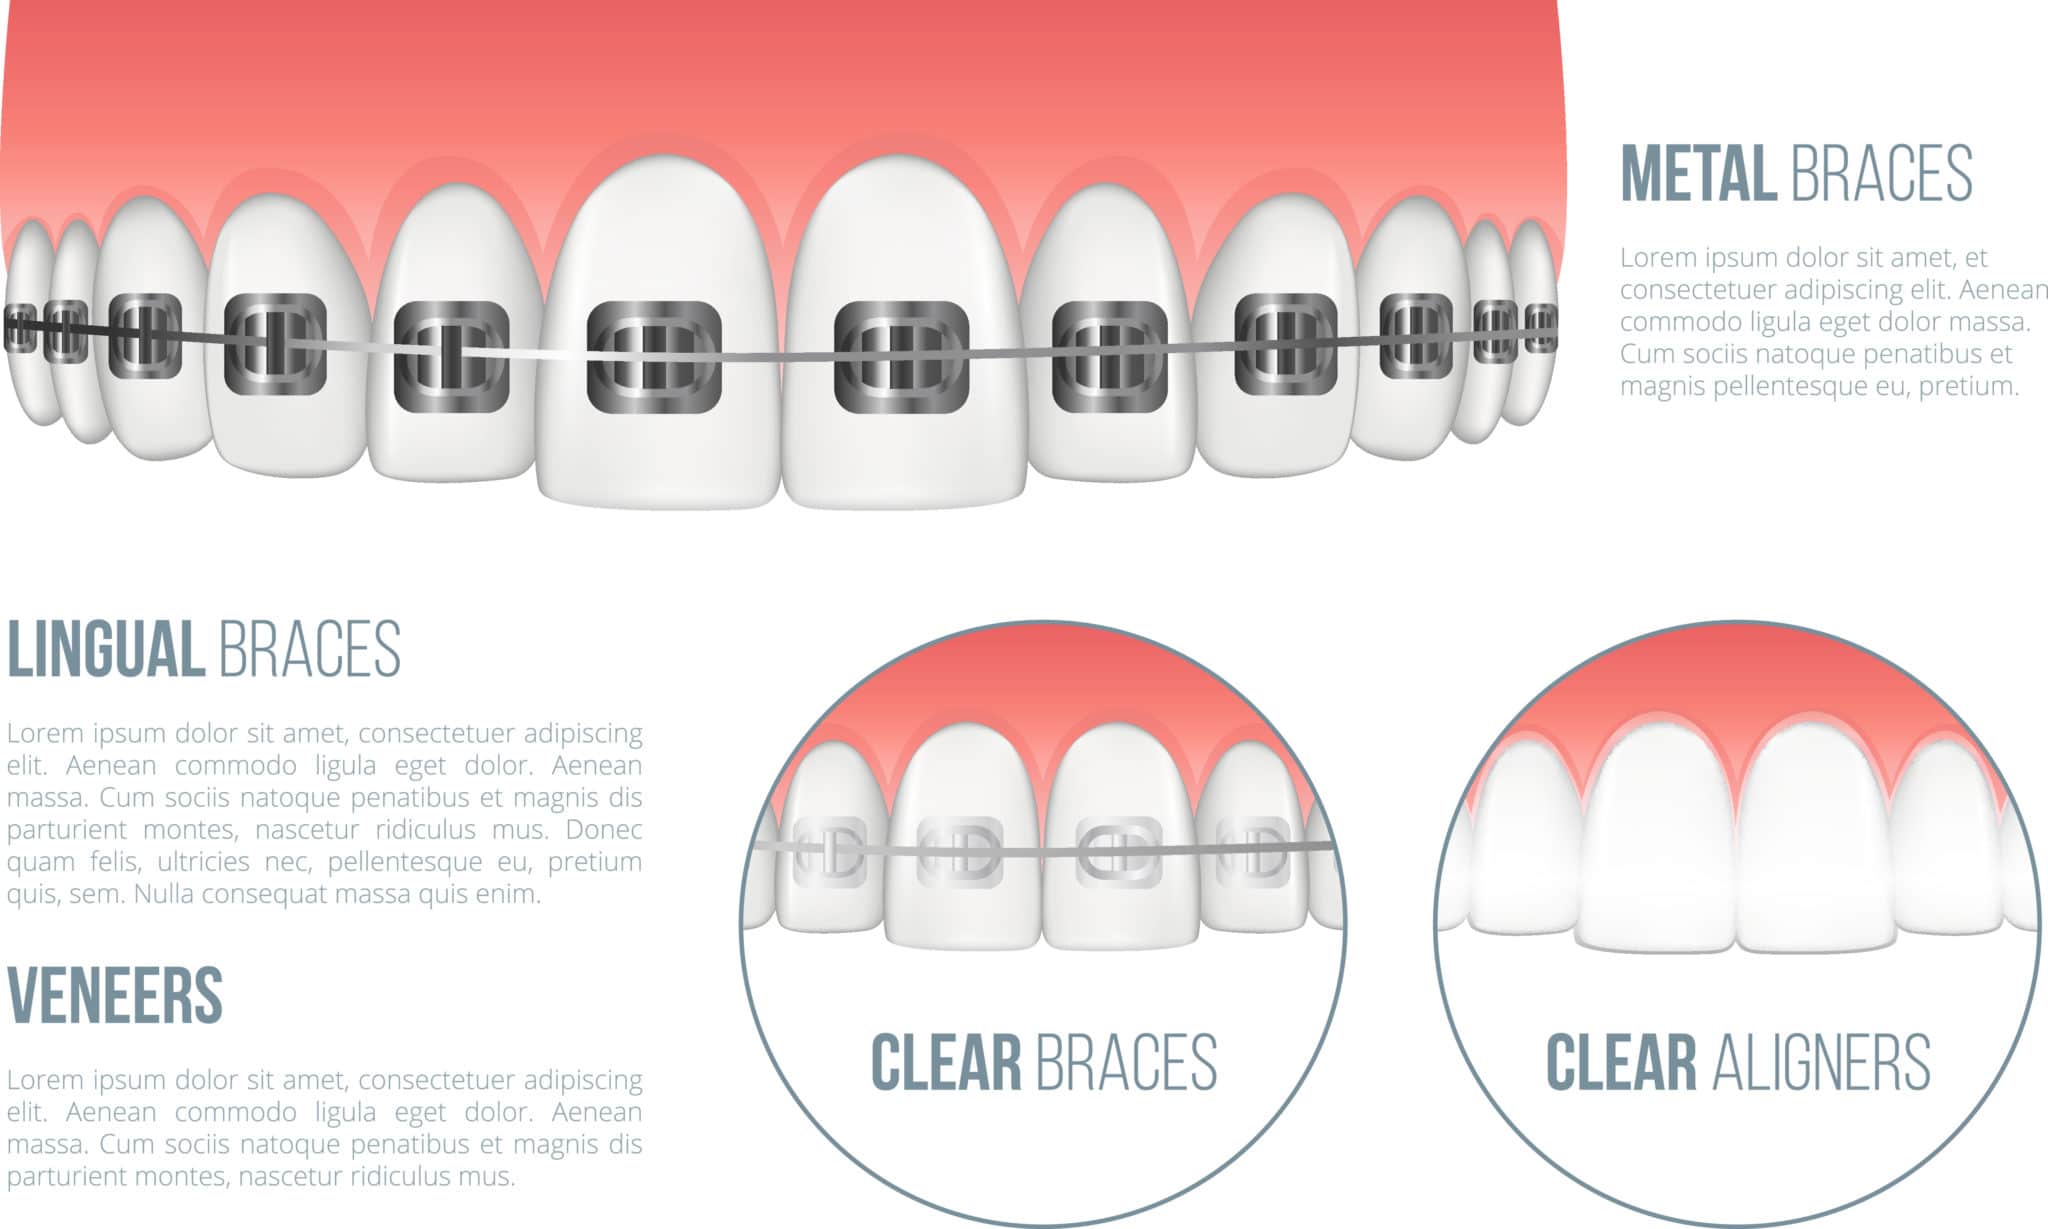 types of braces illustration and how to straighten teeth